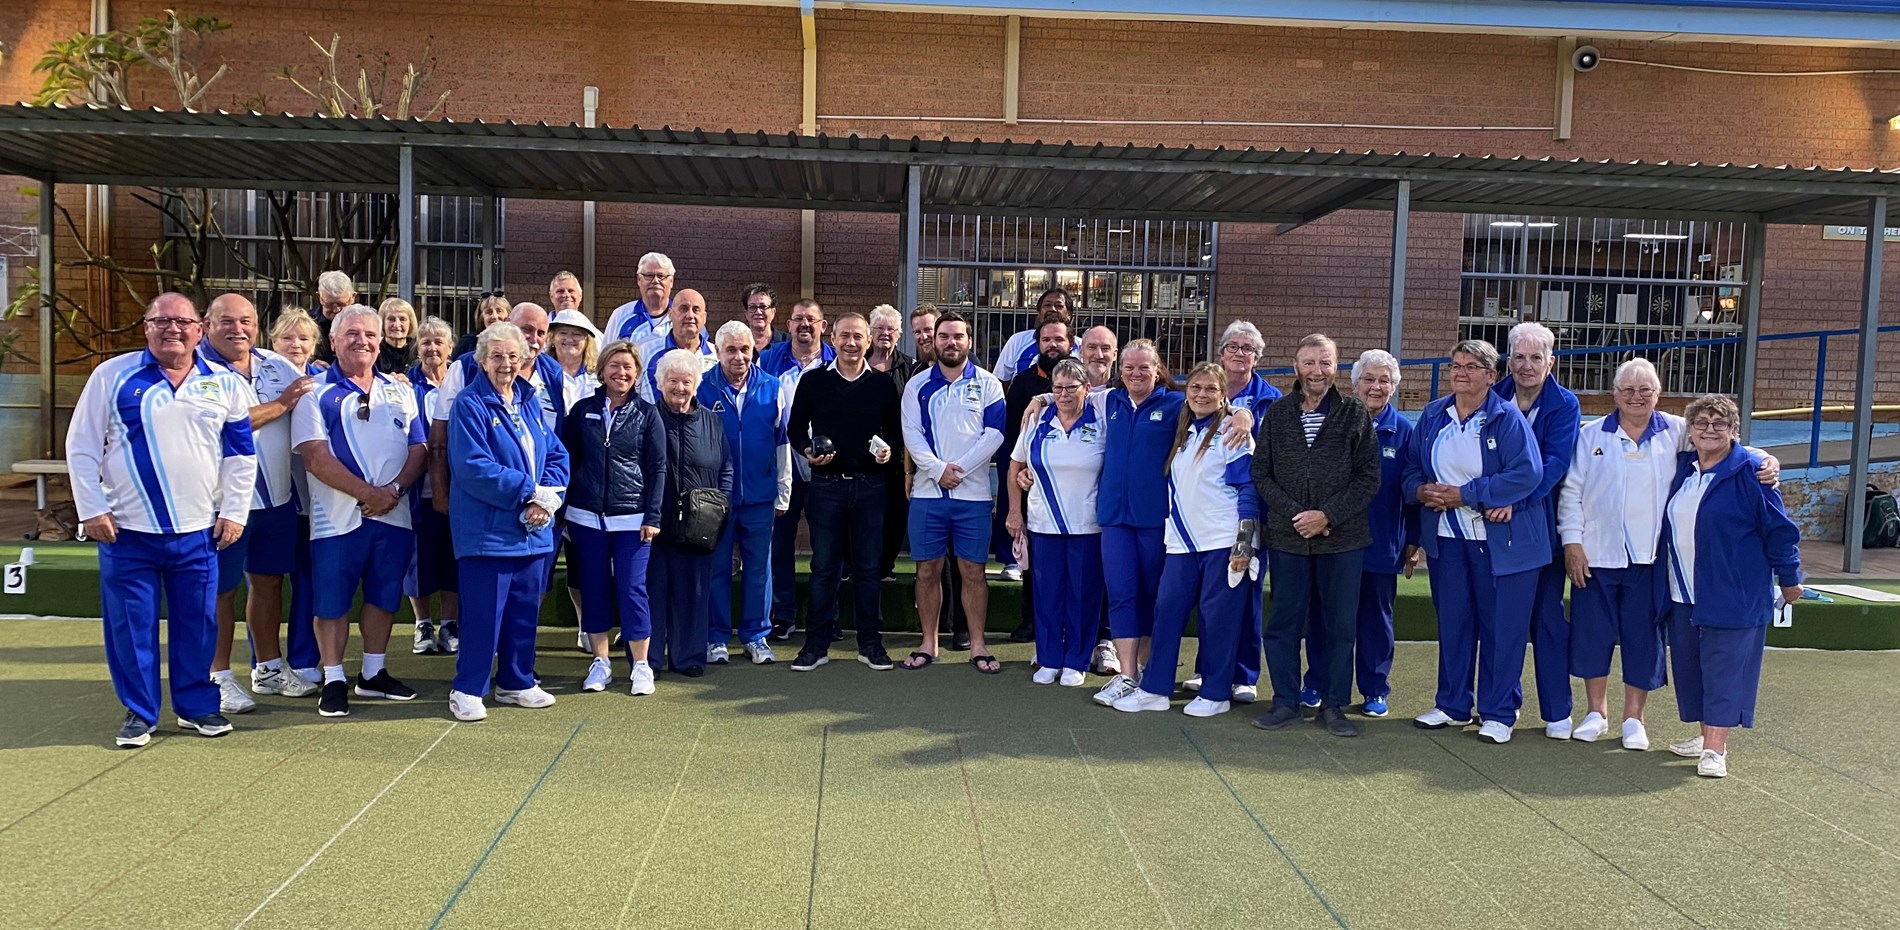 New Lights Switched On for Kwinana Bowling Club  Main Image